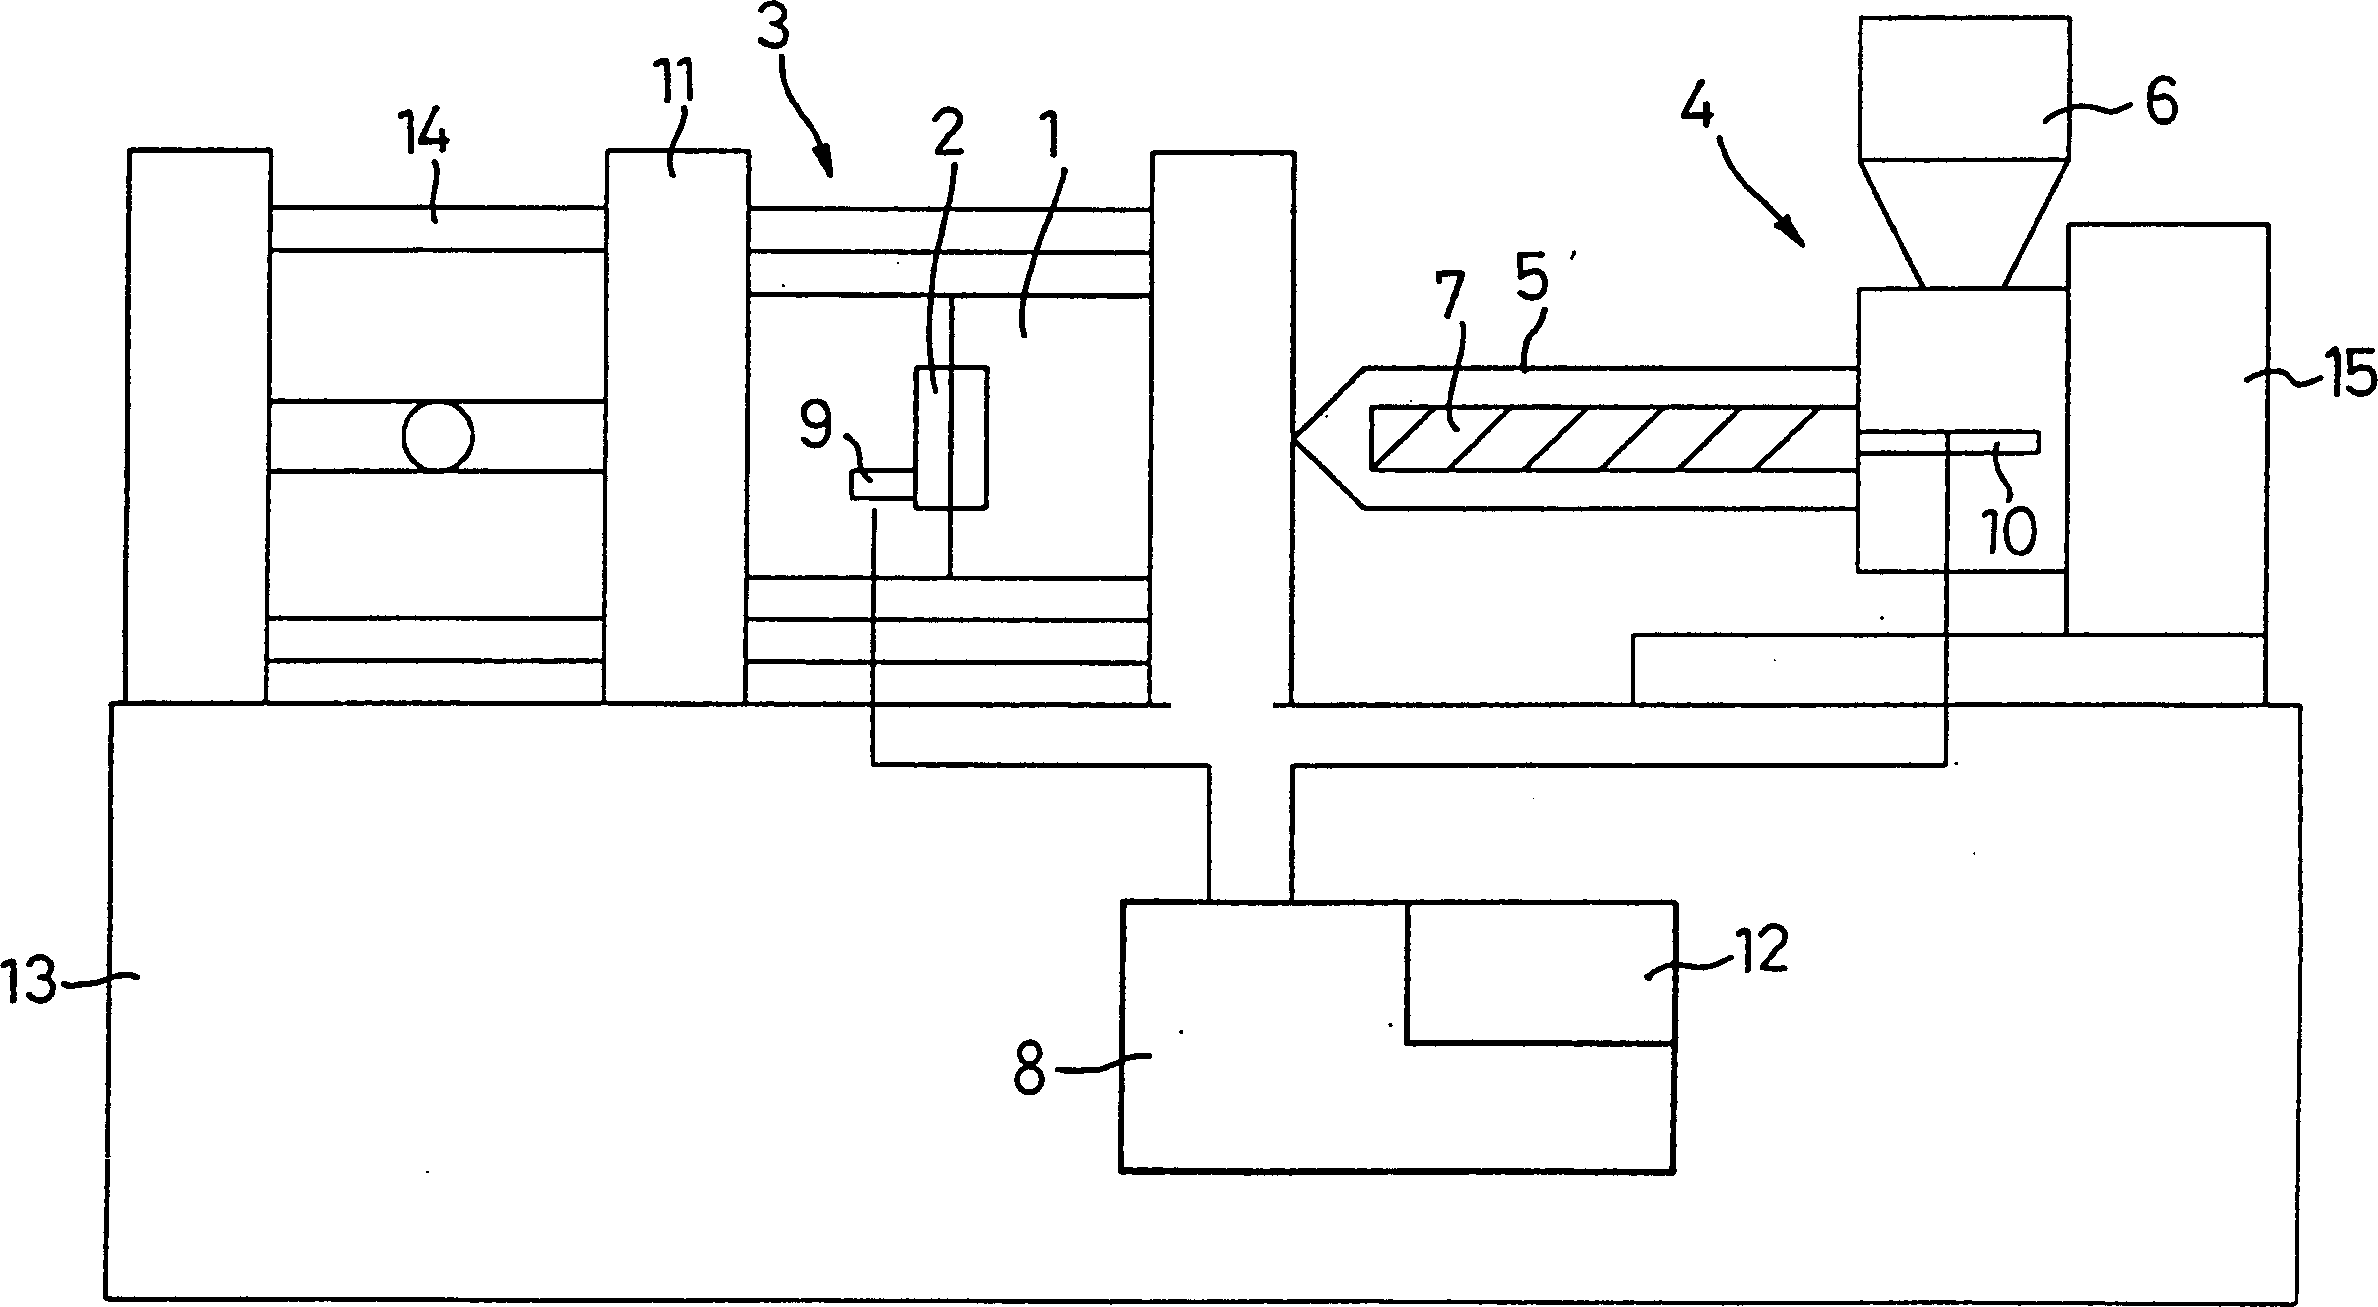 Control method with substitution mode ejection to pressure-relaining changeover point